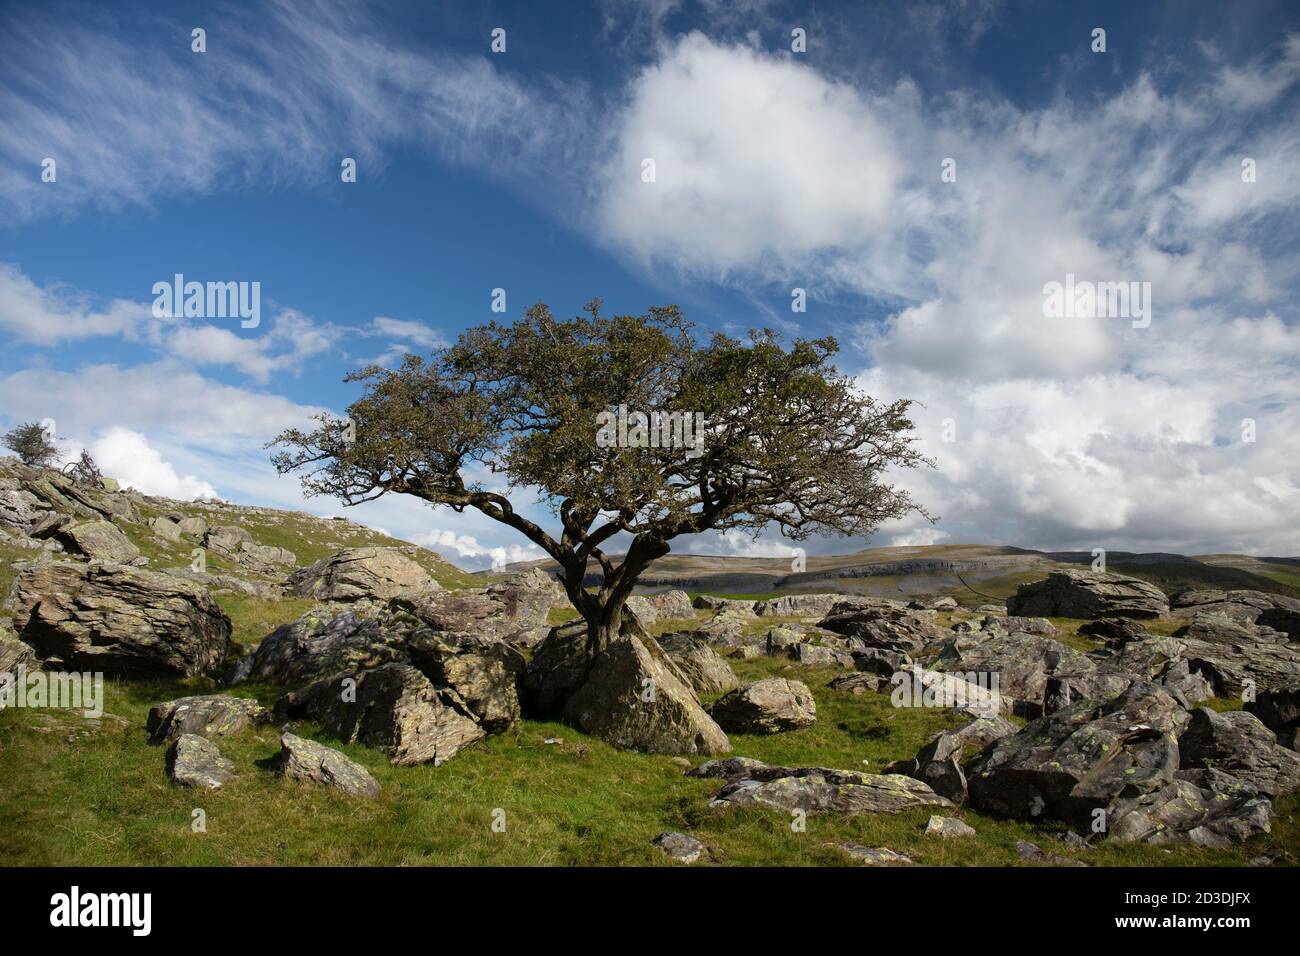 Lone Rowan or Mountain Ash and Erratic boulders at Norber Brow, above Austwick, Crummackdale, North Yorkshire, Yorkshire Dales National Park, UK. Stock Photo